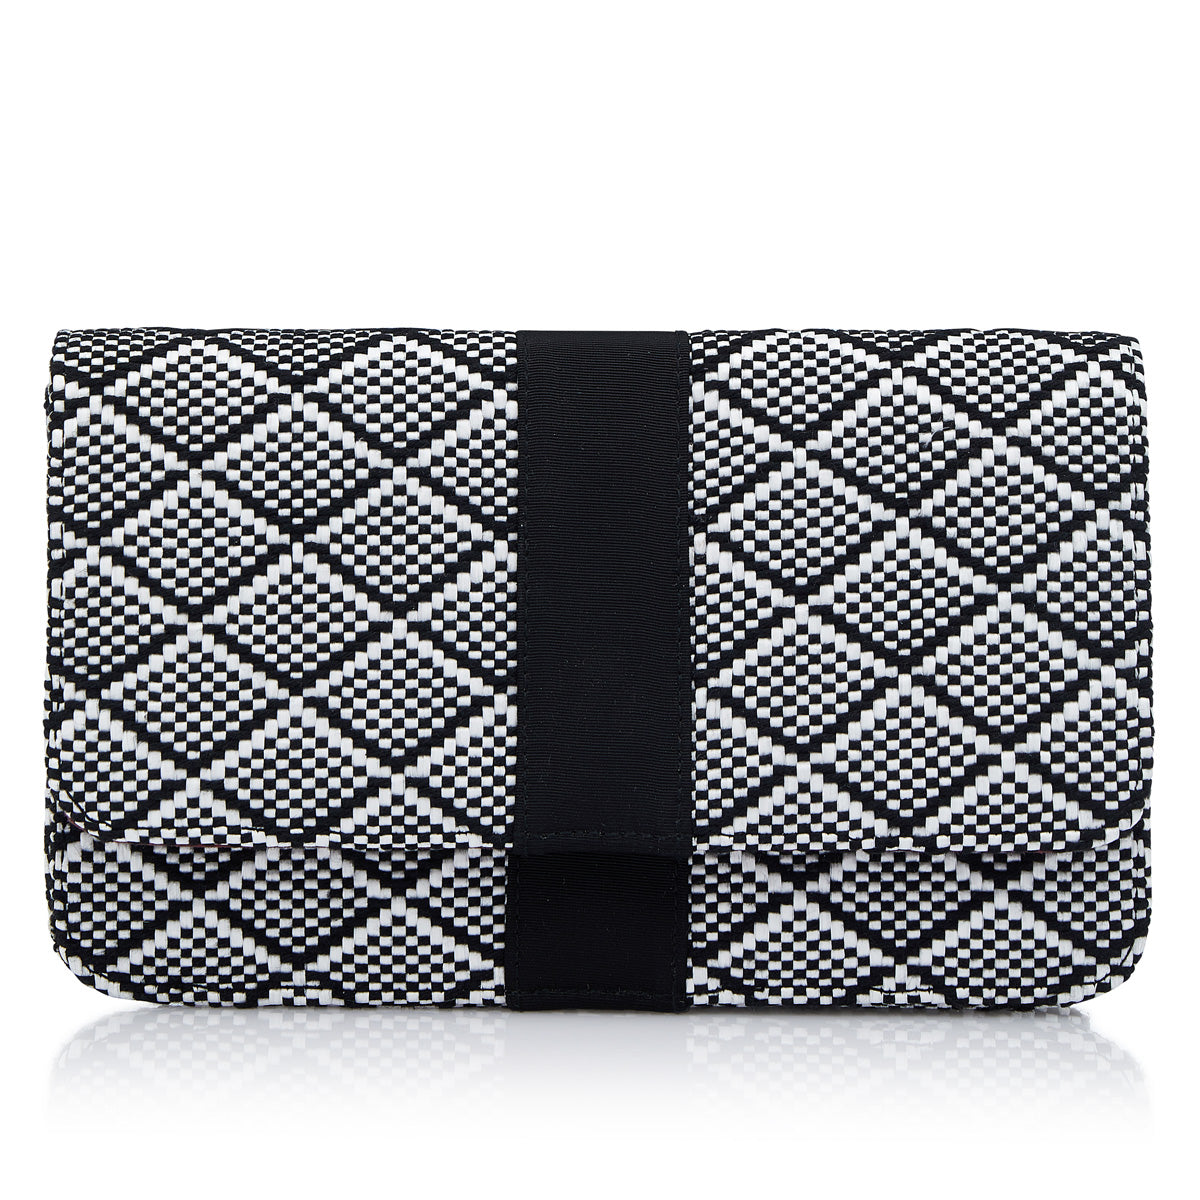 Clutch with black and white geometric pattern